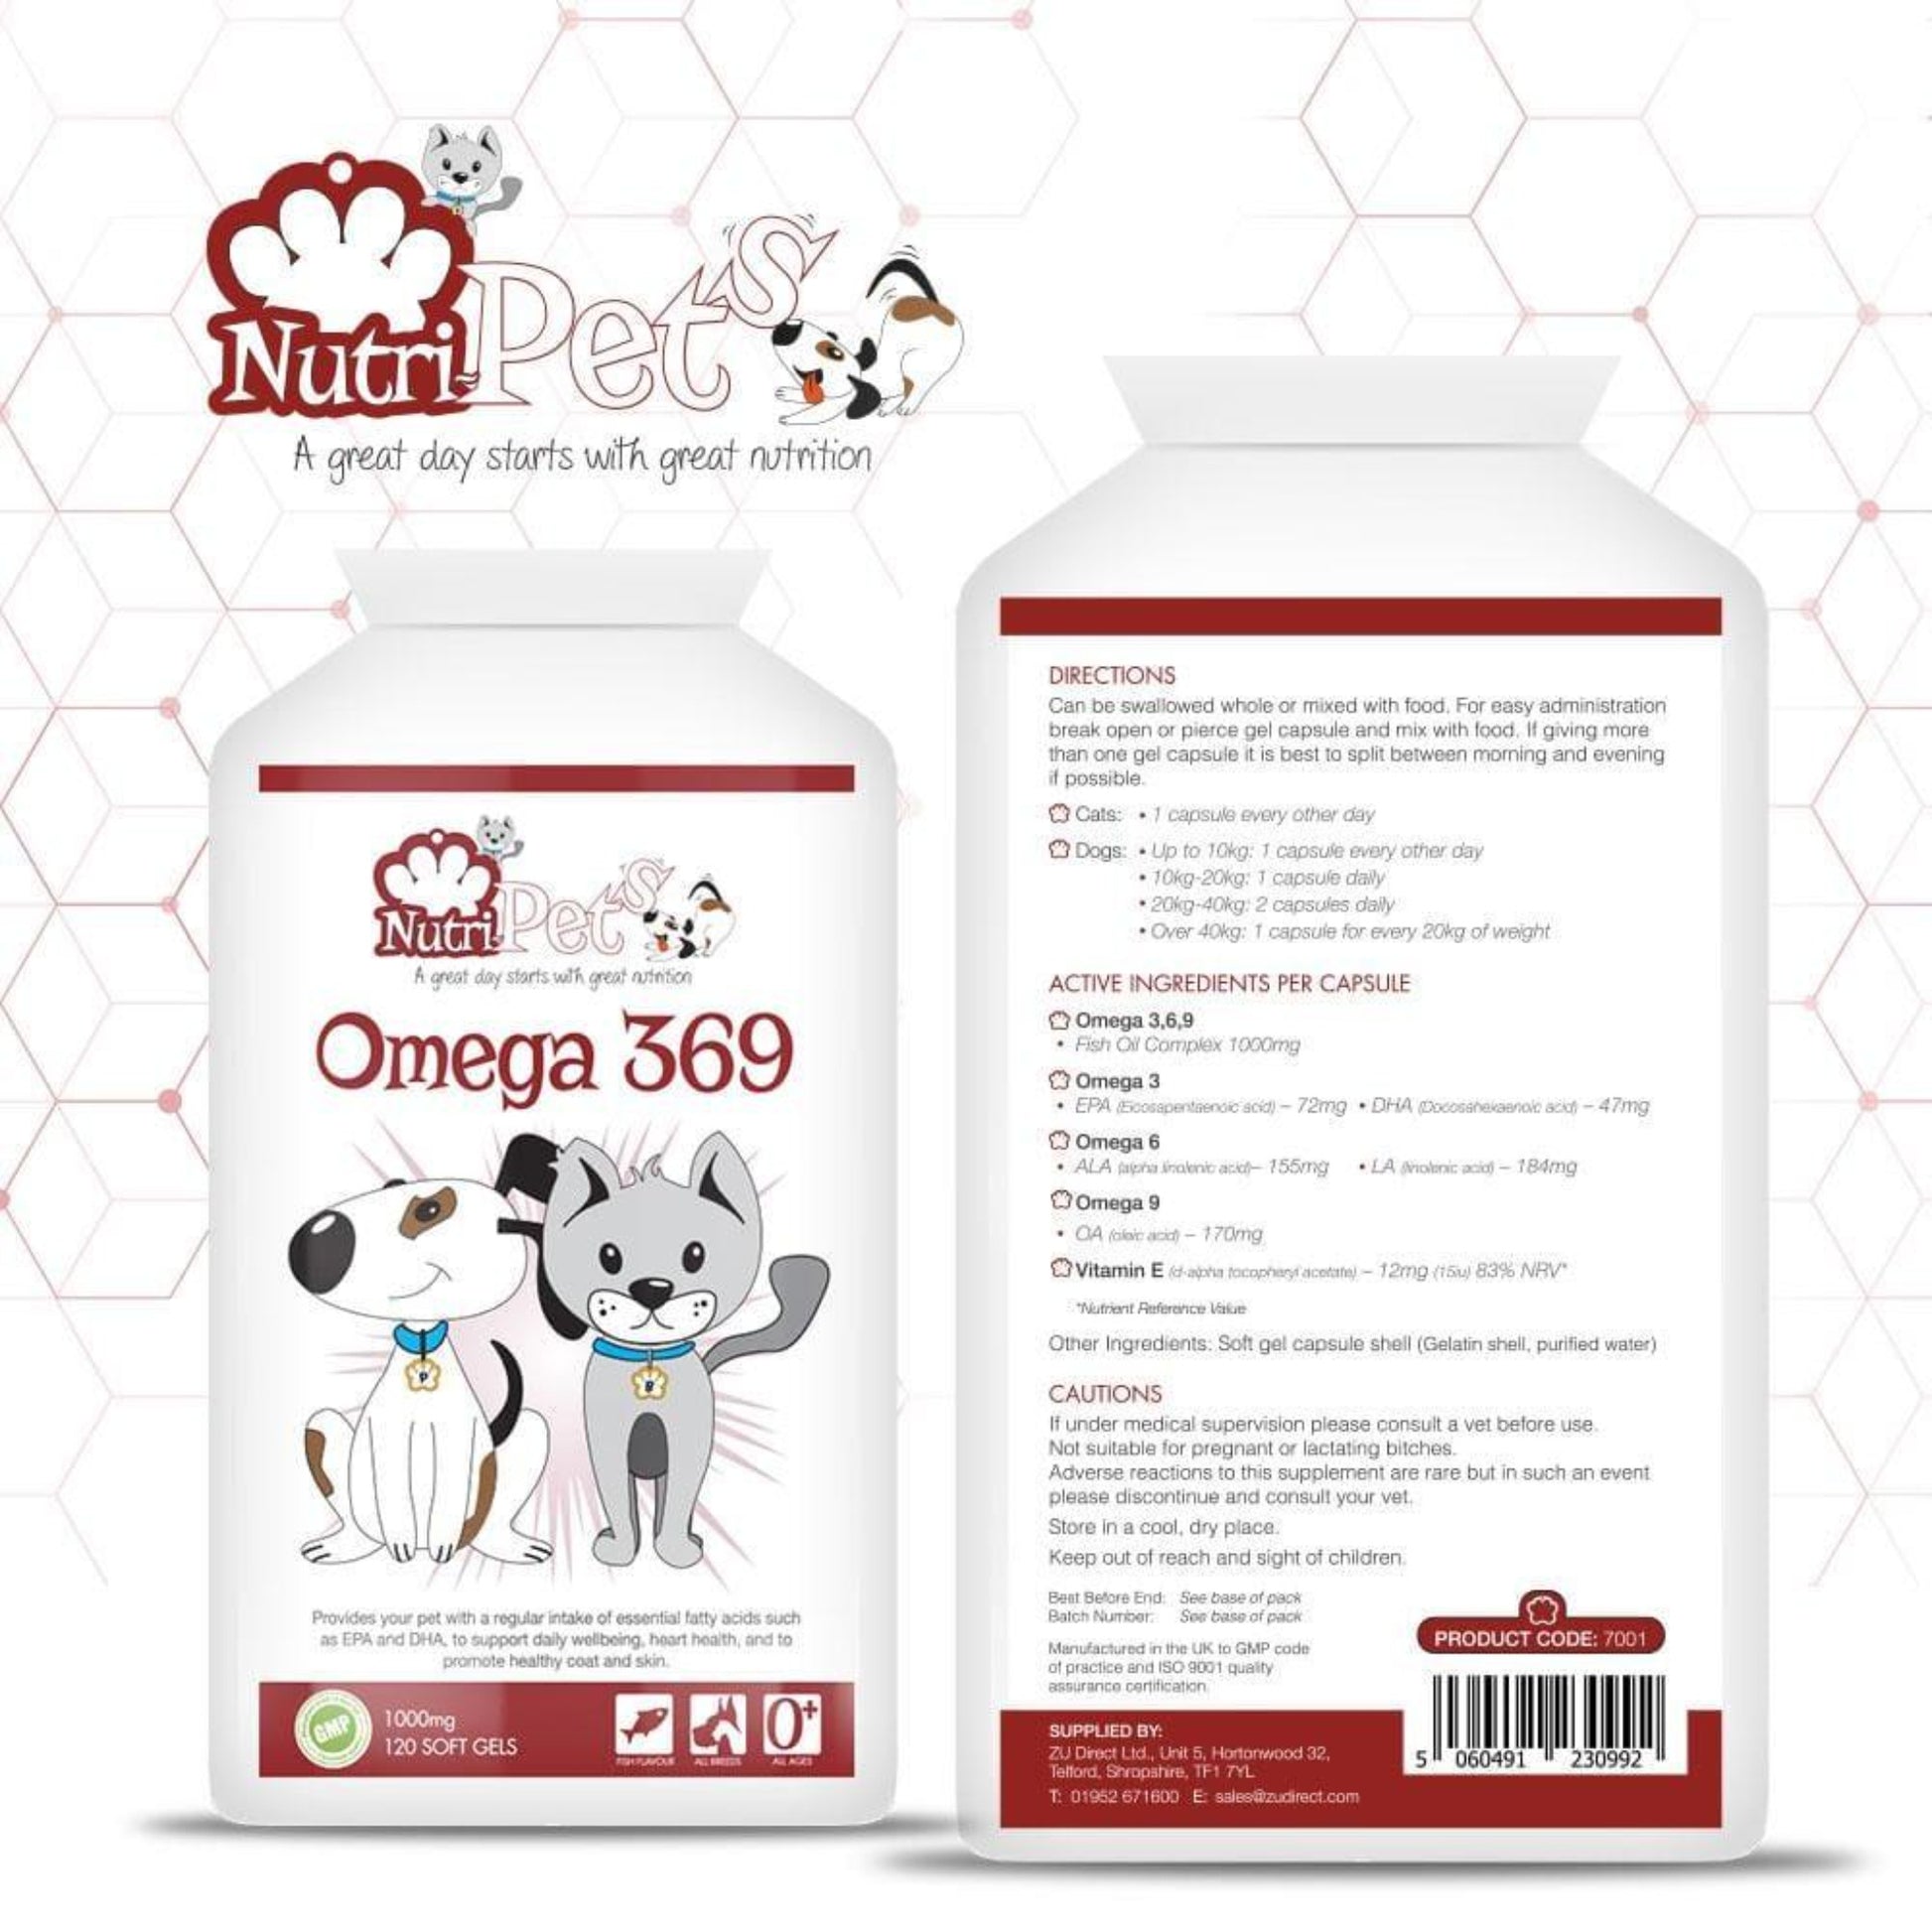 Nutri-Pets Omega 369 Softgel Capsule label highlighting ingredients, directions for use and nutritional profile